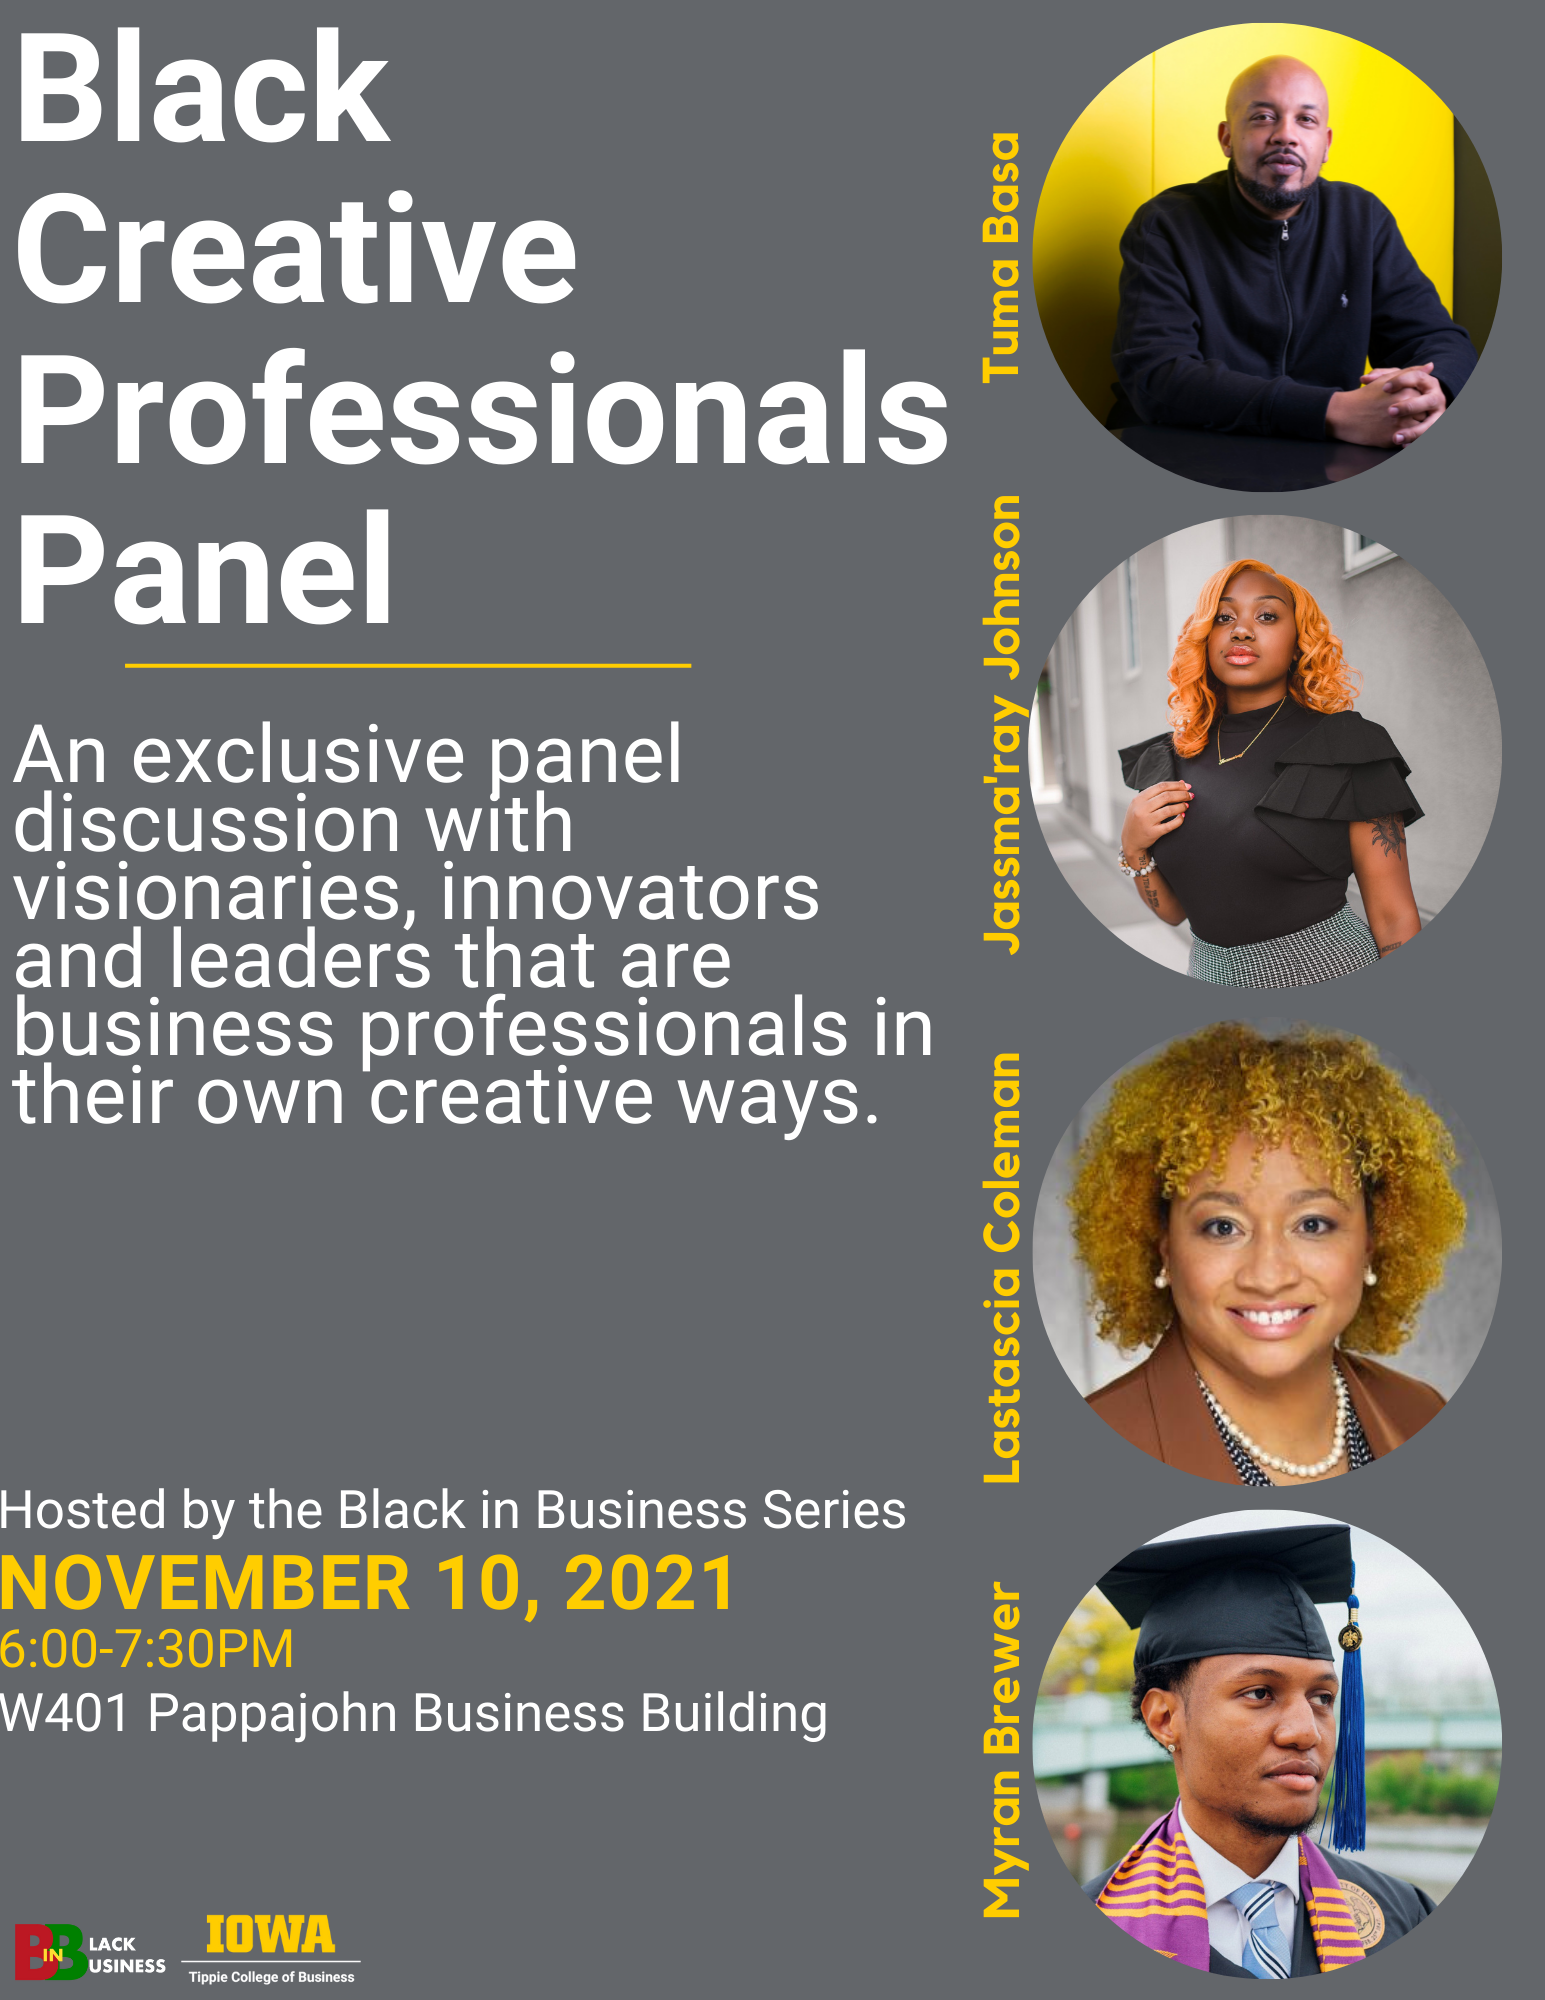 Black in Business Series Presents -- Black Creative Professionals Panel promotional image